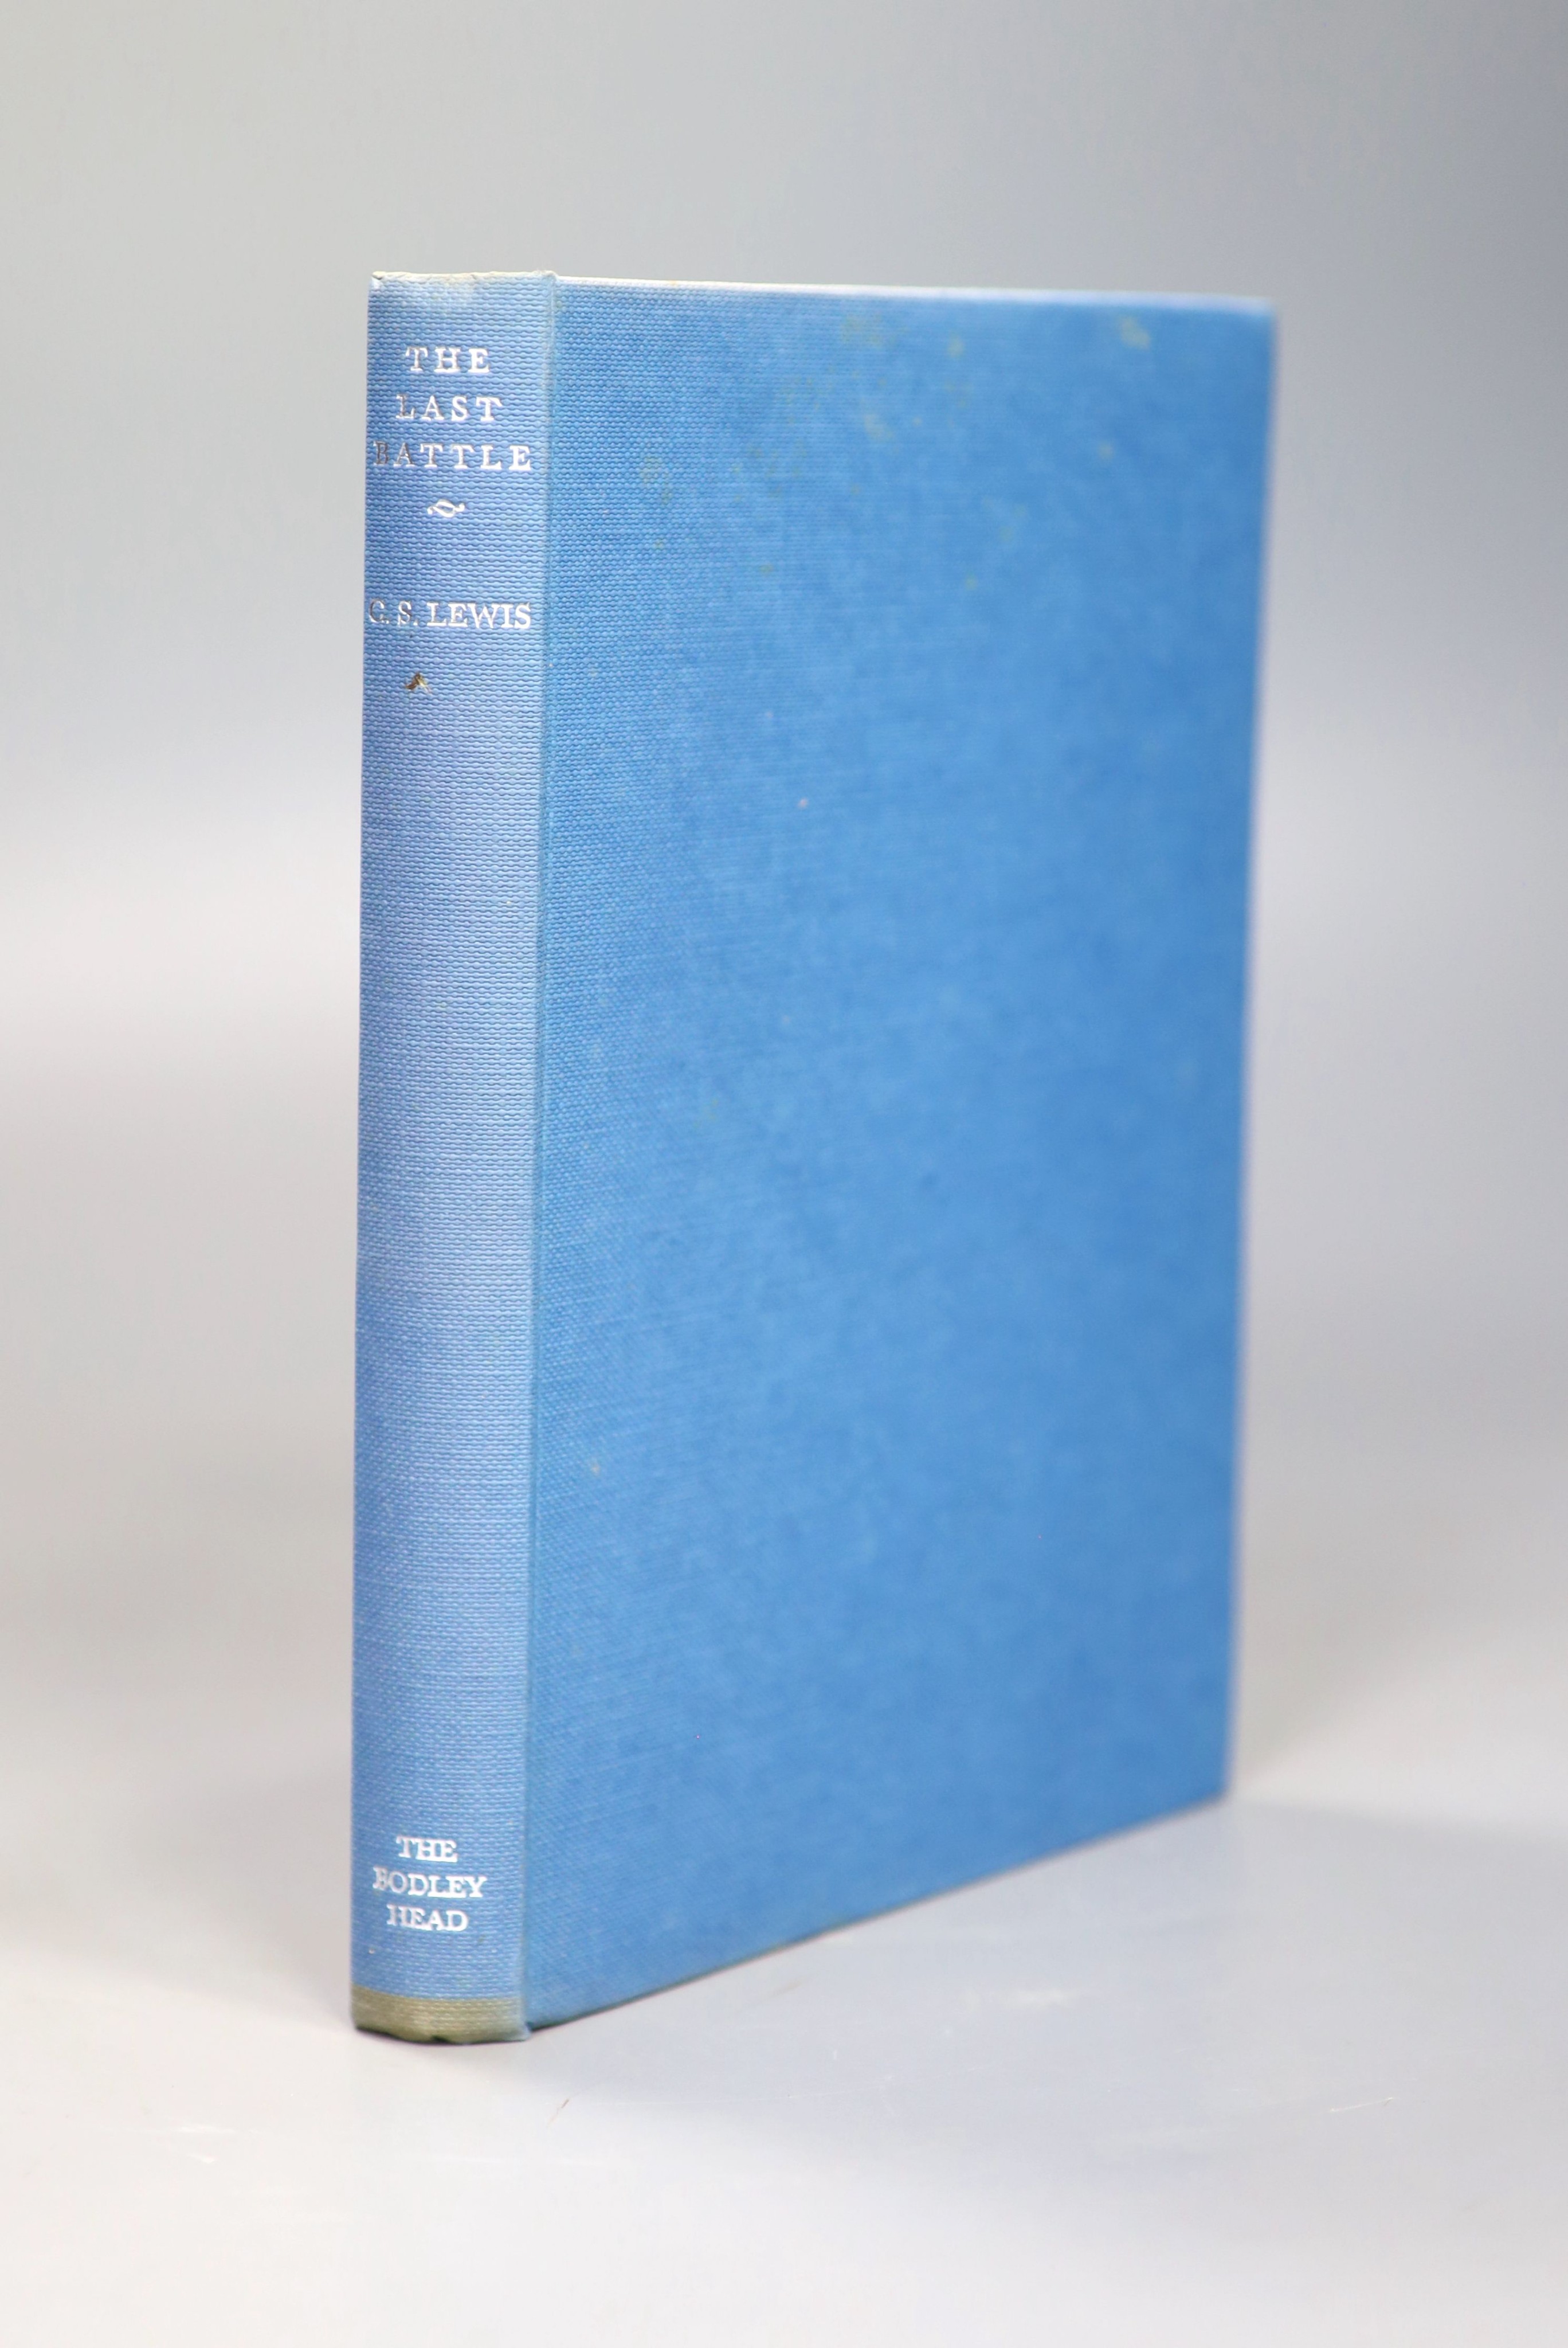 Lewis, Clive Staples - The Last Battle, 1st edition, 8vo, illustrated by Pauline Baynes, original cloth, in unclipped d/j, The Bodley Head, London, 1956